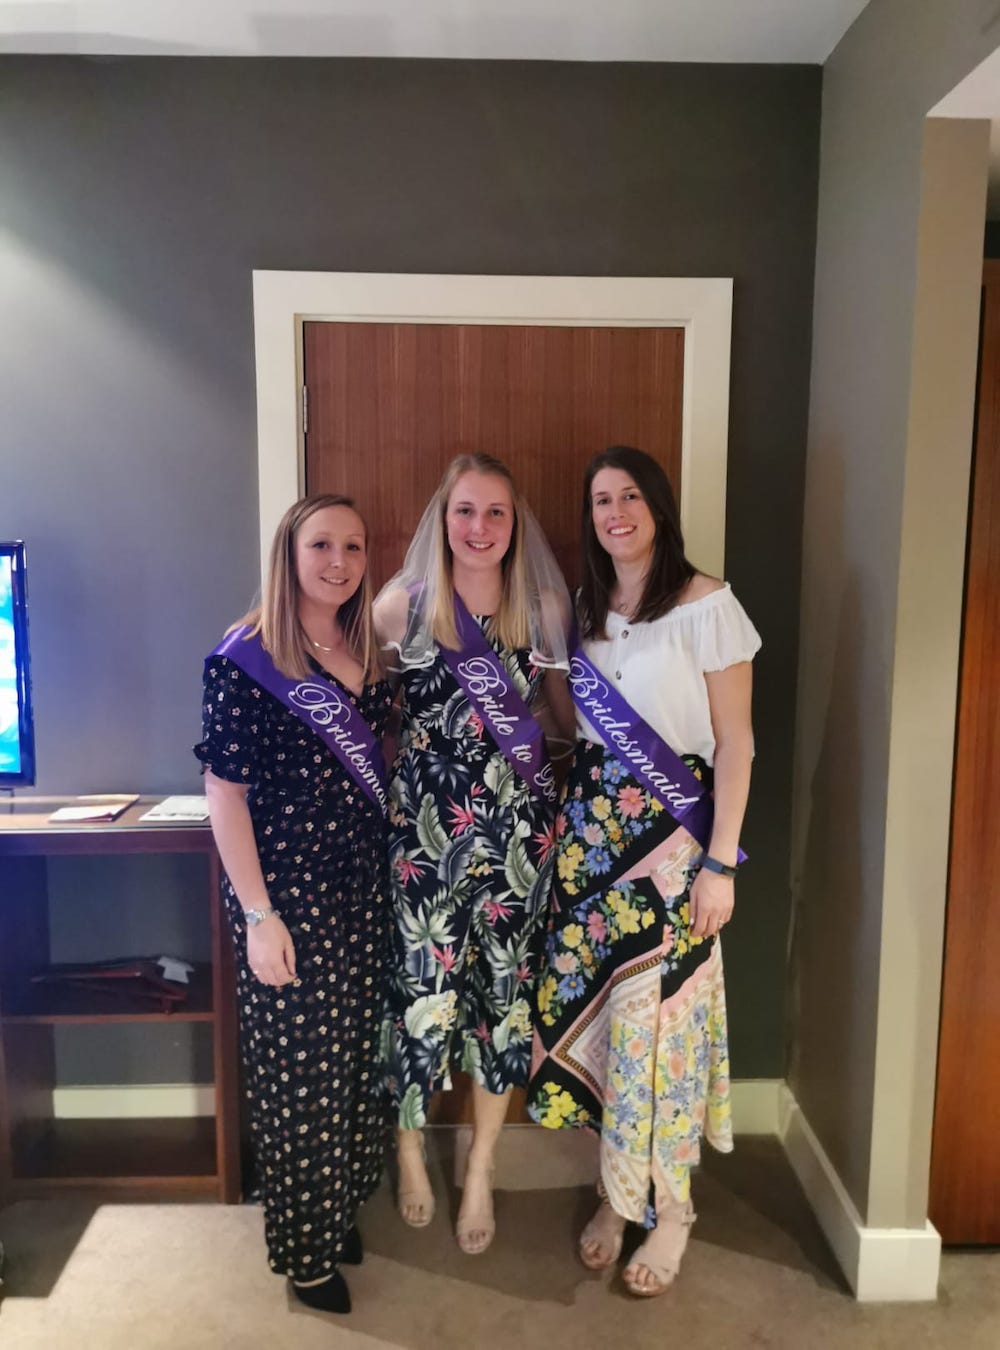 Jess stacey and jane at hen do knutsford 2019